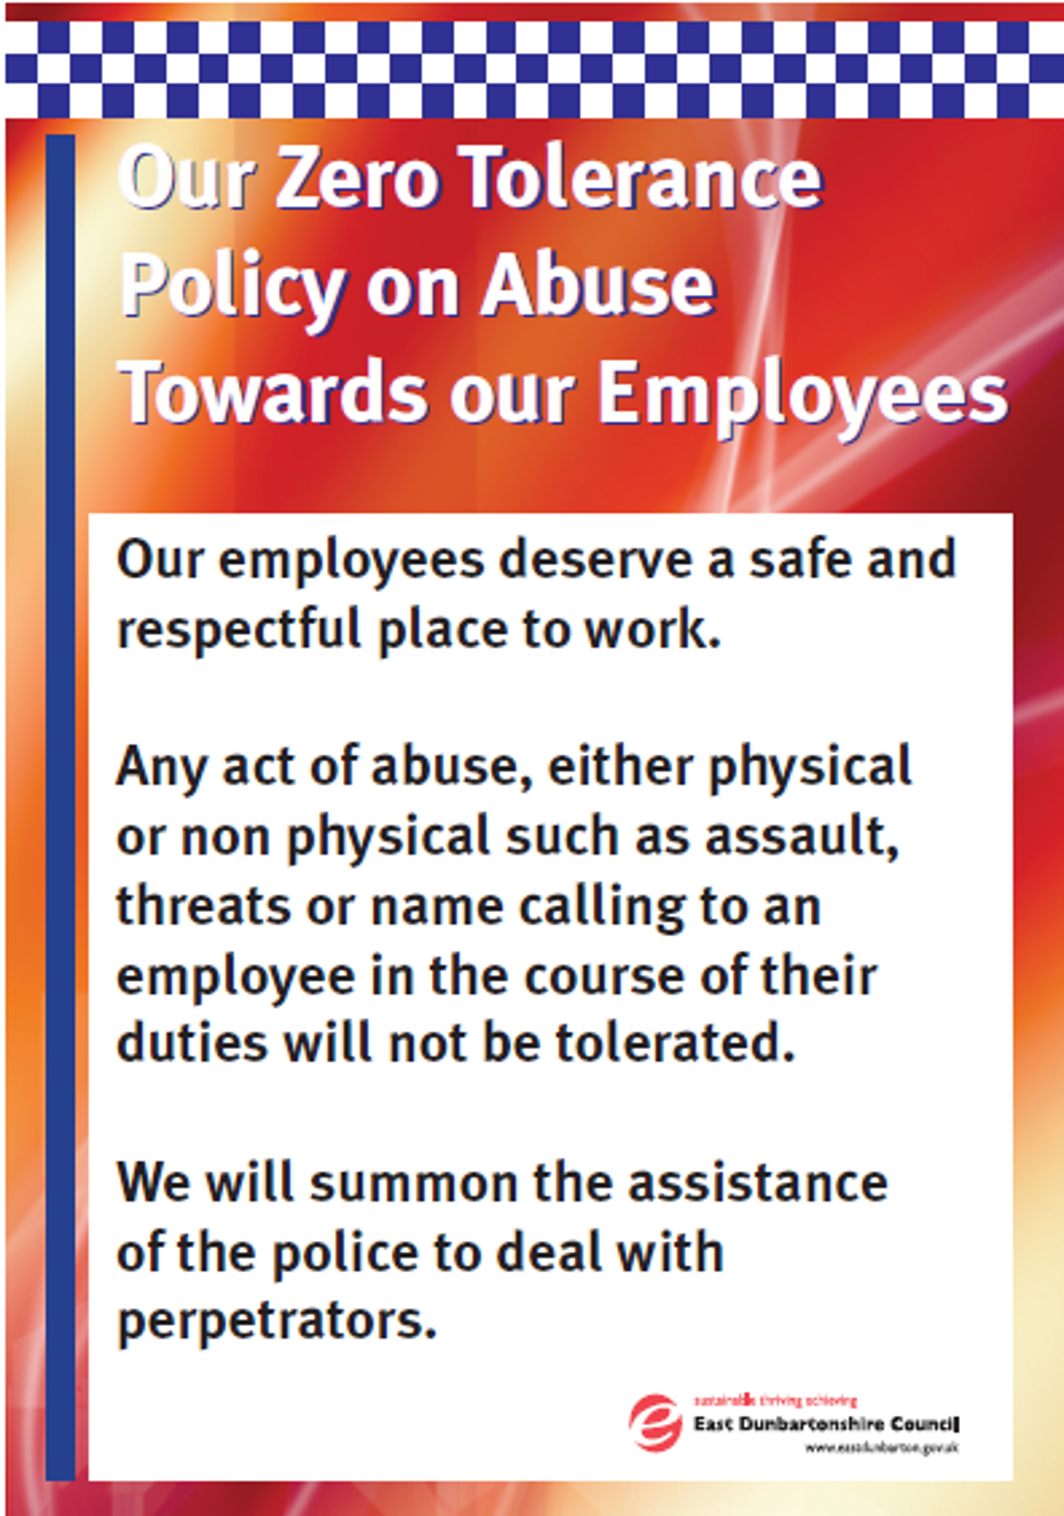 Our employees deserve a safe and respectful place to work. Any act of abuse, either physical or non-physical such as assault, threats or name calling to an employee in the course of their duties will not be tolerated. We will summon the assistance of the police to deal with perpetrators.